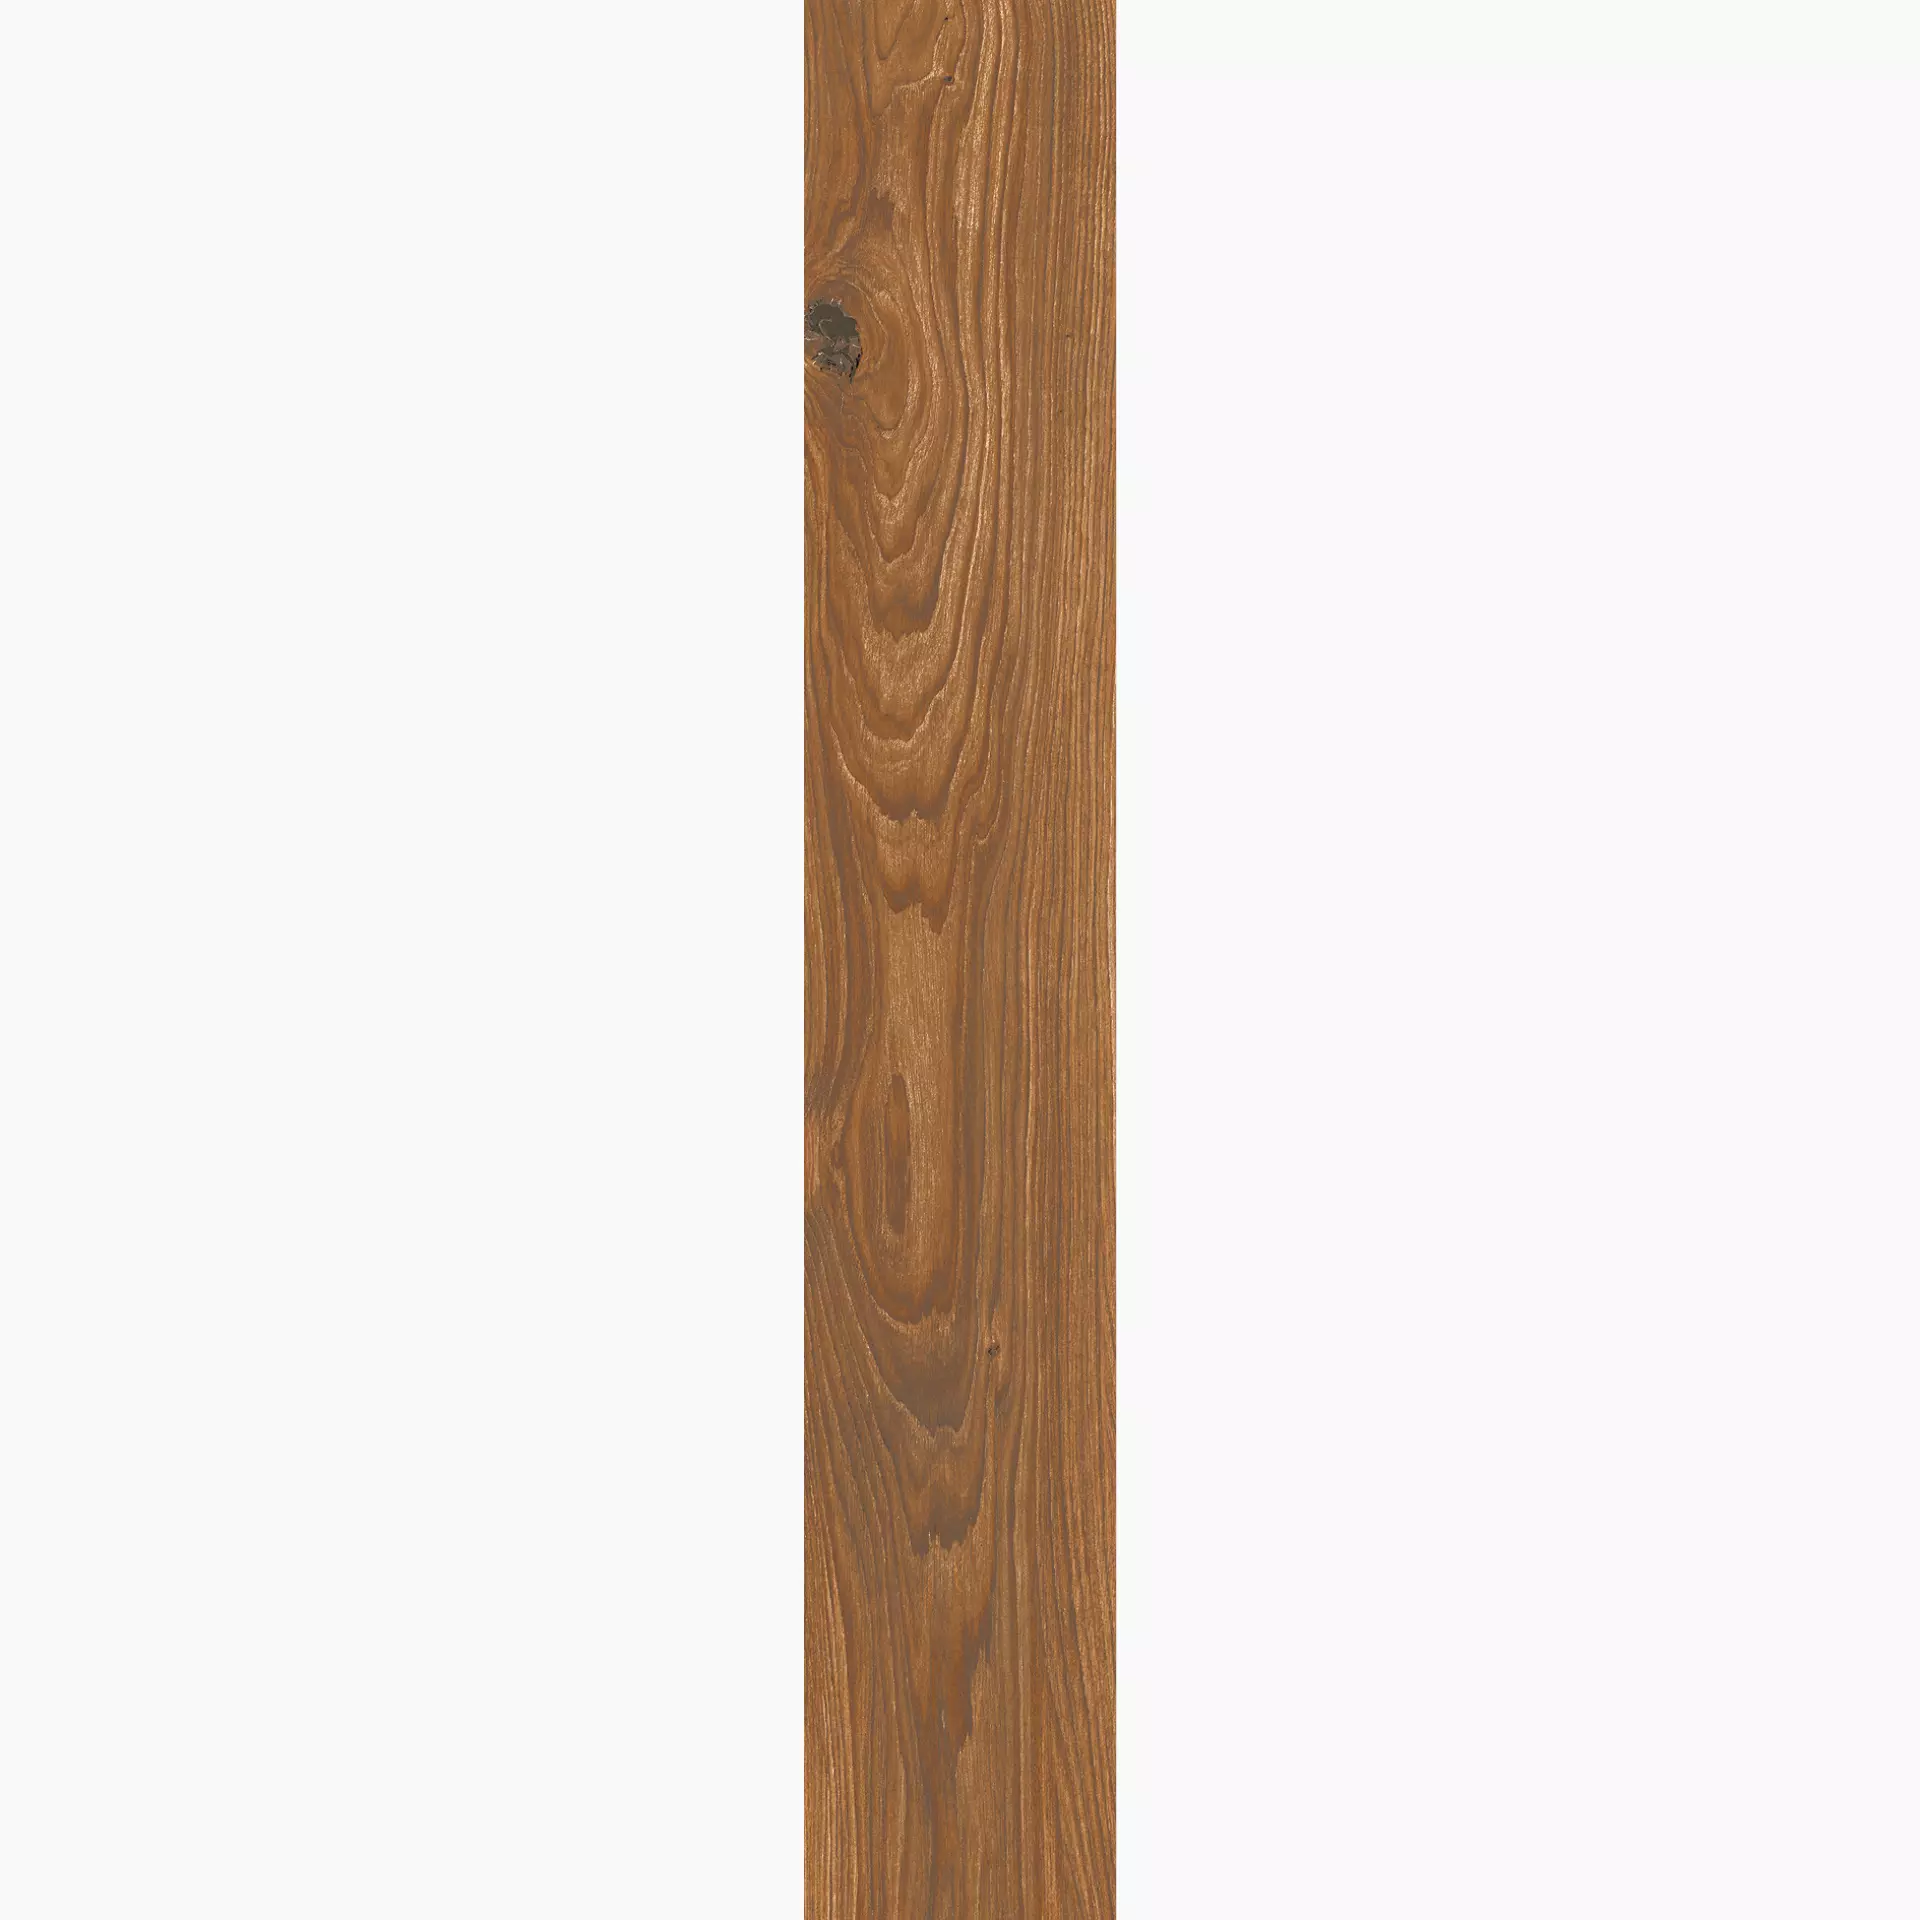 Novabell Artwood Cherry Naturale AWD56RT 26x160cm rectified 9,5mm